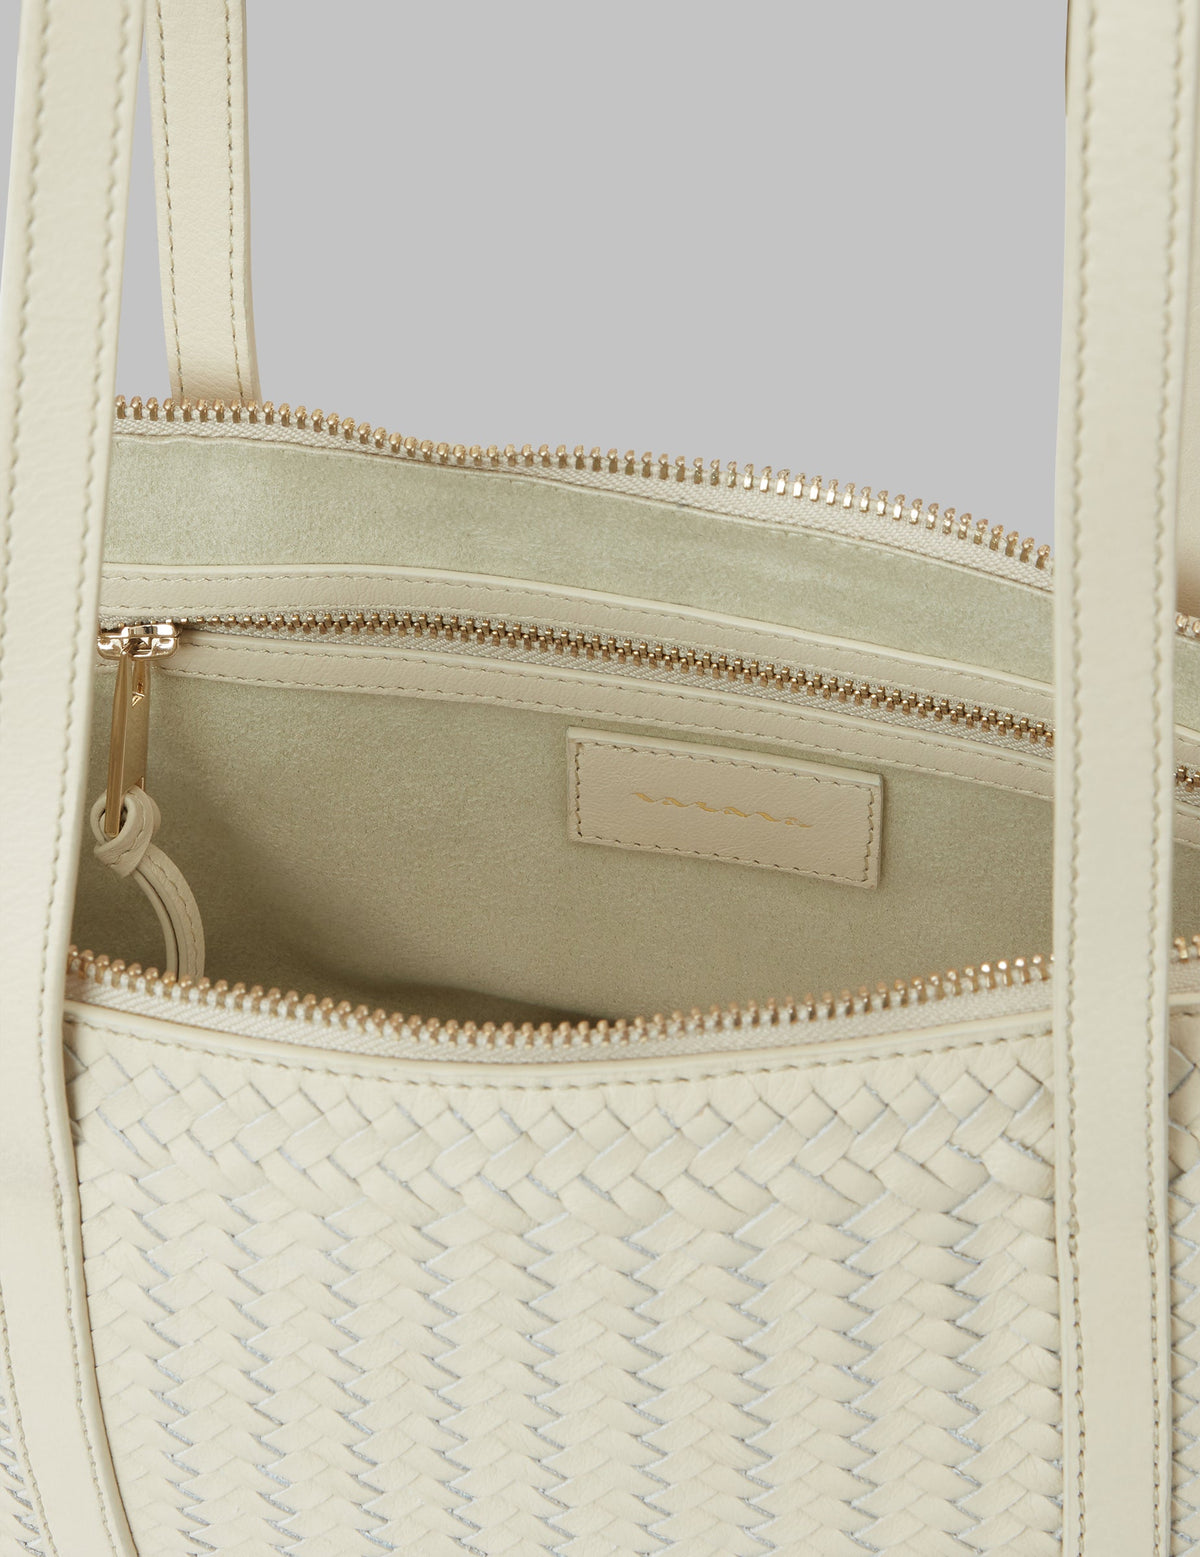 Tidal Foam Handwoven Leather East West Bag | Sustainable Purse